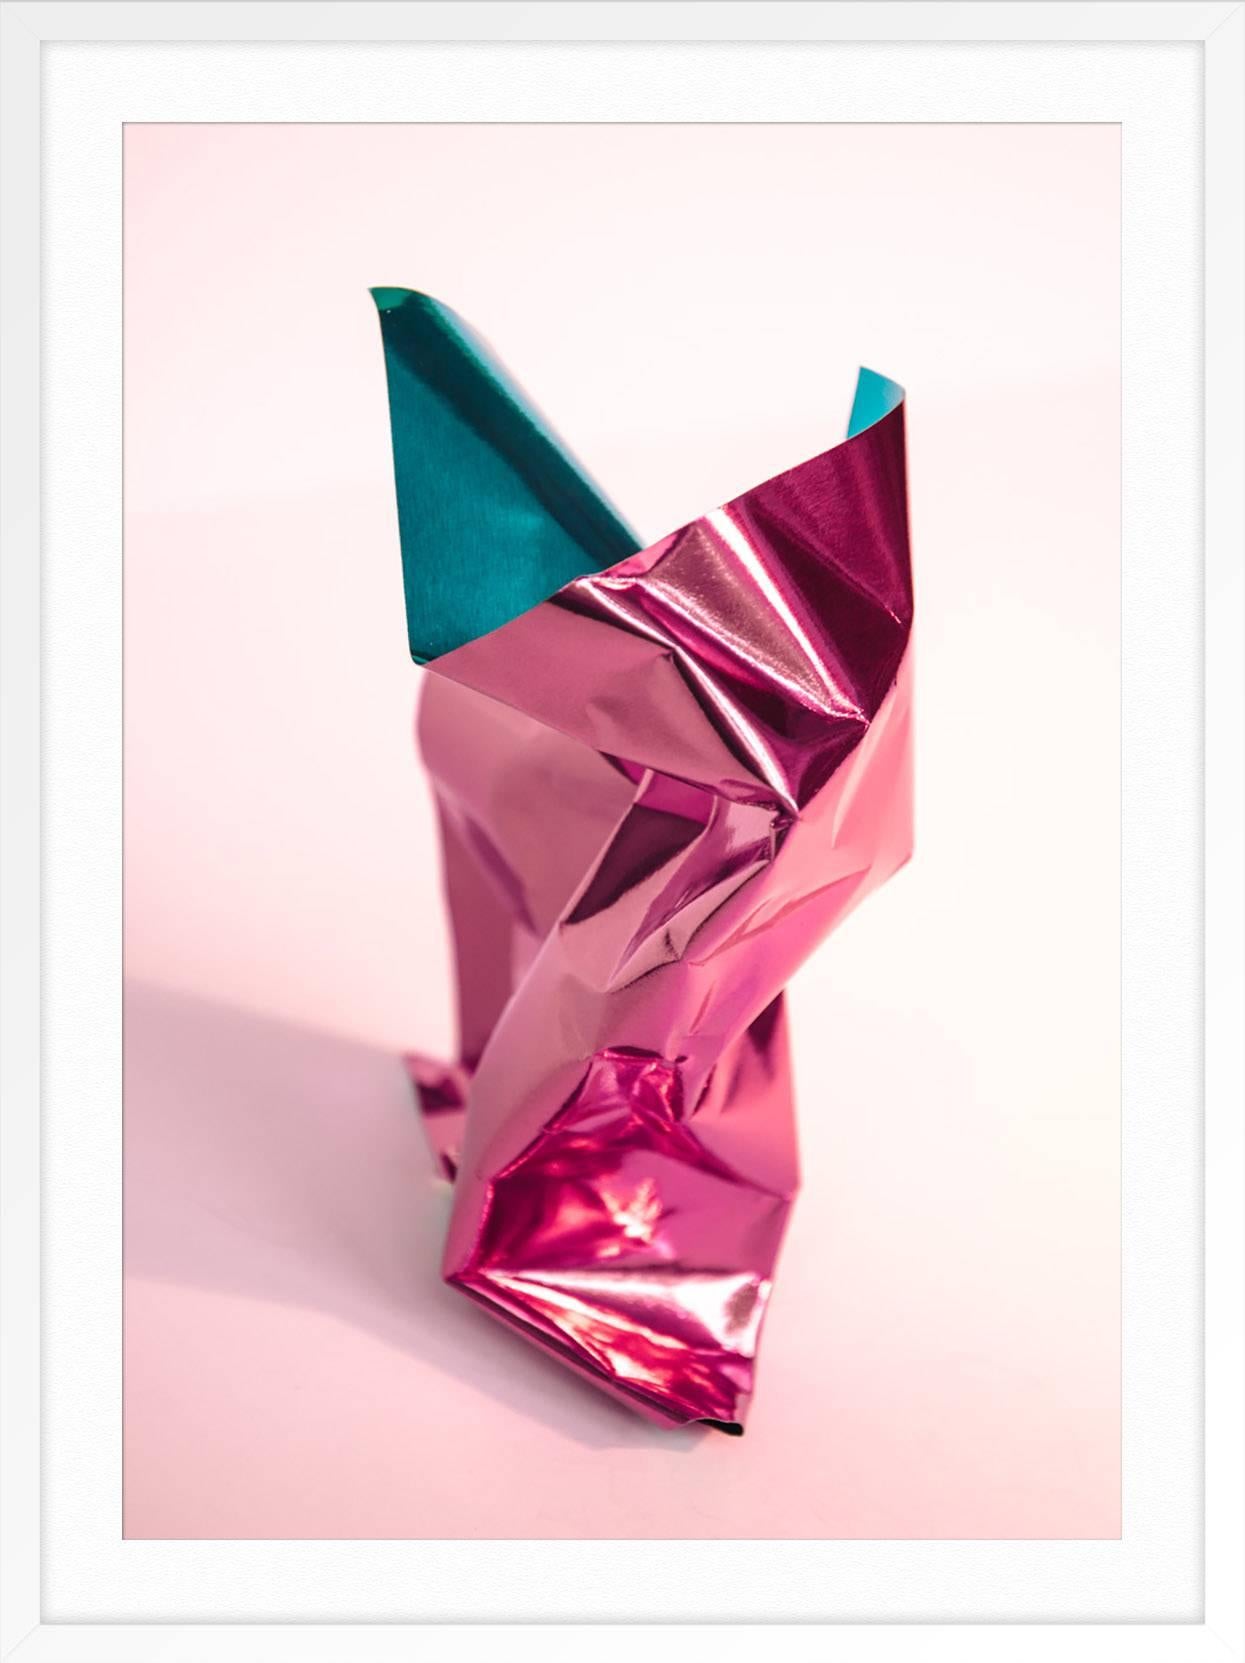 ABOUT THIS PIECE: Freeforms : Exploring form and color combinations in a series of freestanding paper foil sculptures. Using natural light I arranged foiled shapes in different positions and folds to play with the light in the most colorful way they